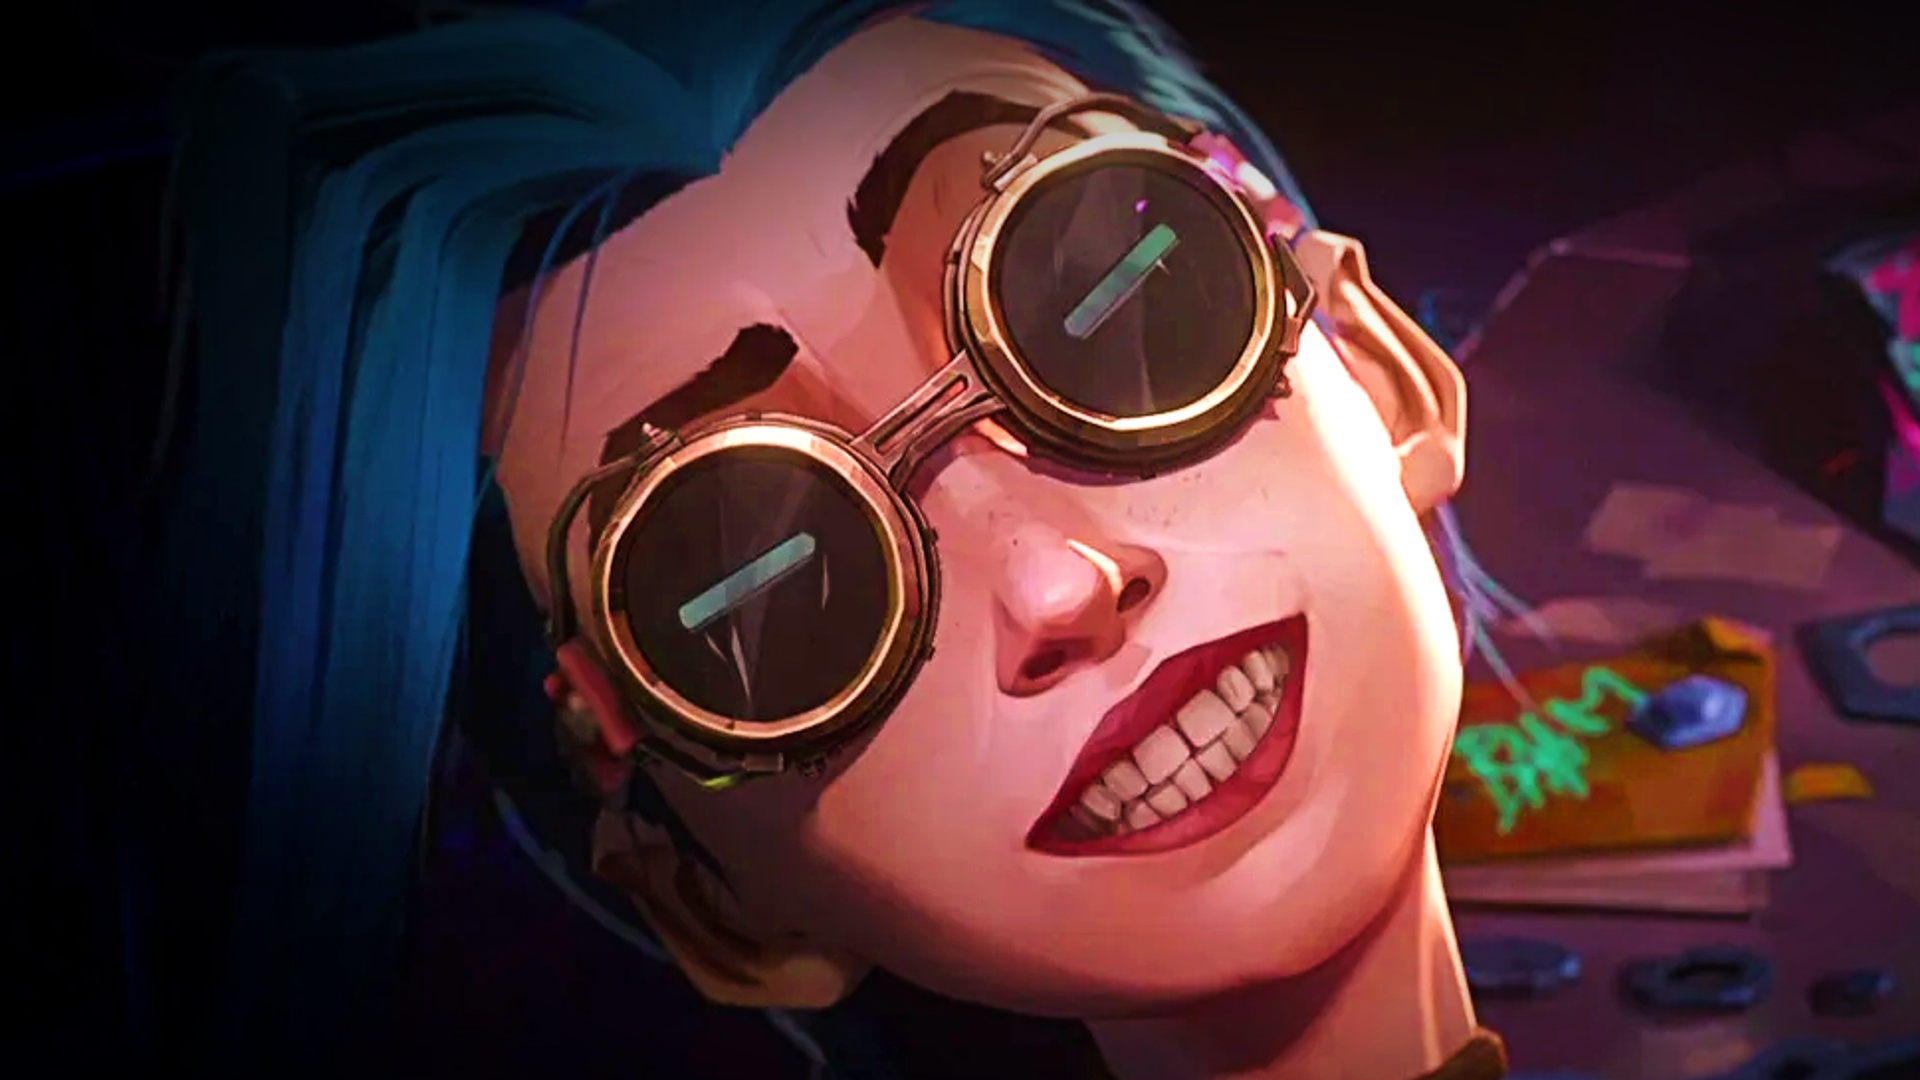 League of Legends animated series Arcane is canon, Riot confirms